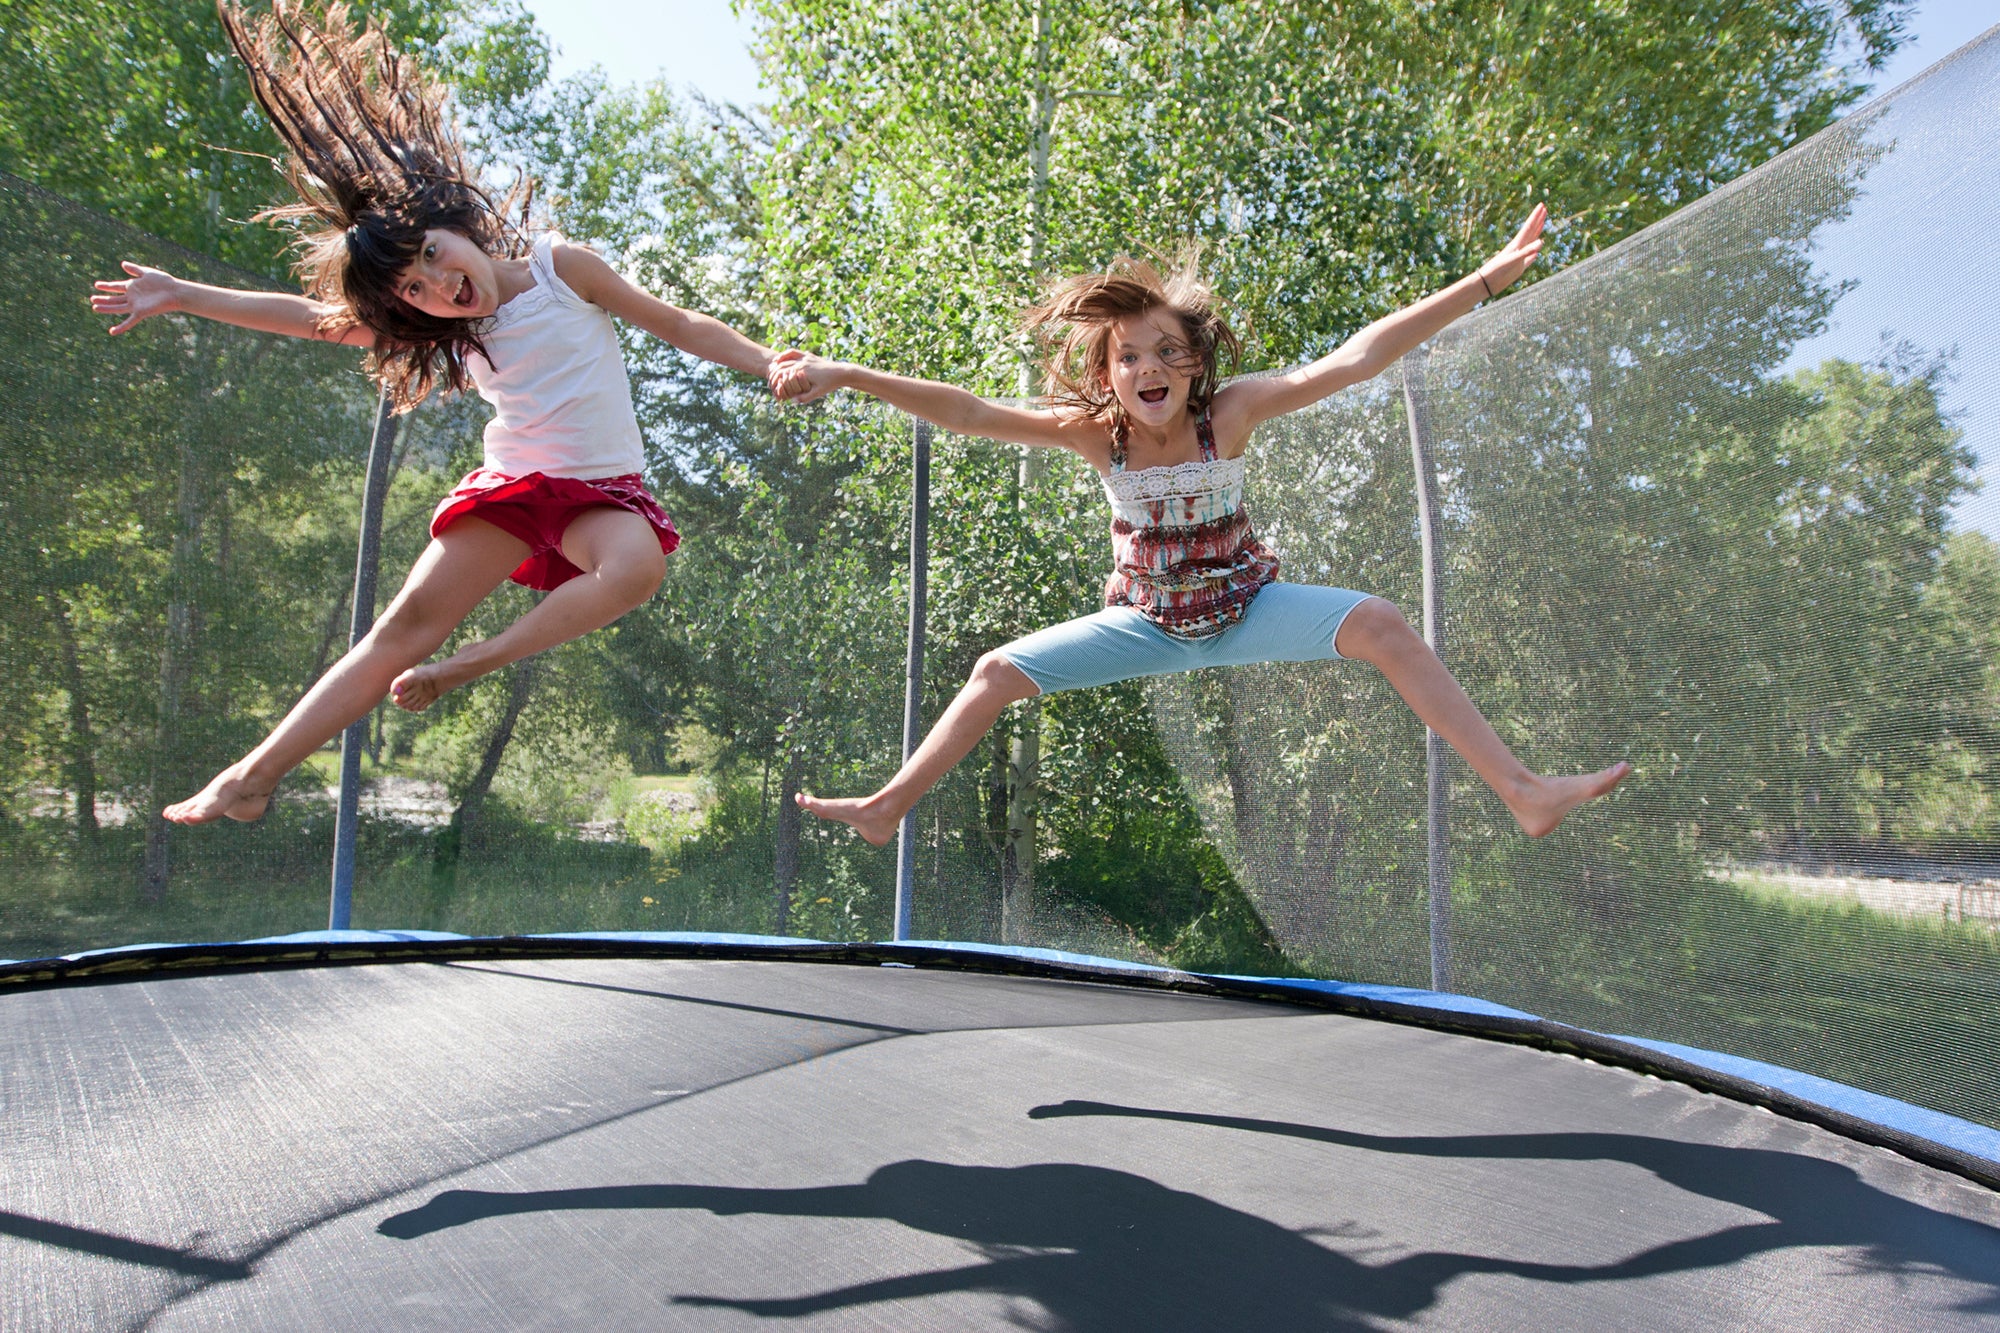 Sisters jumping on a trampoline